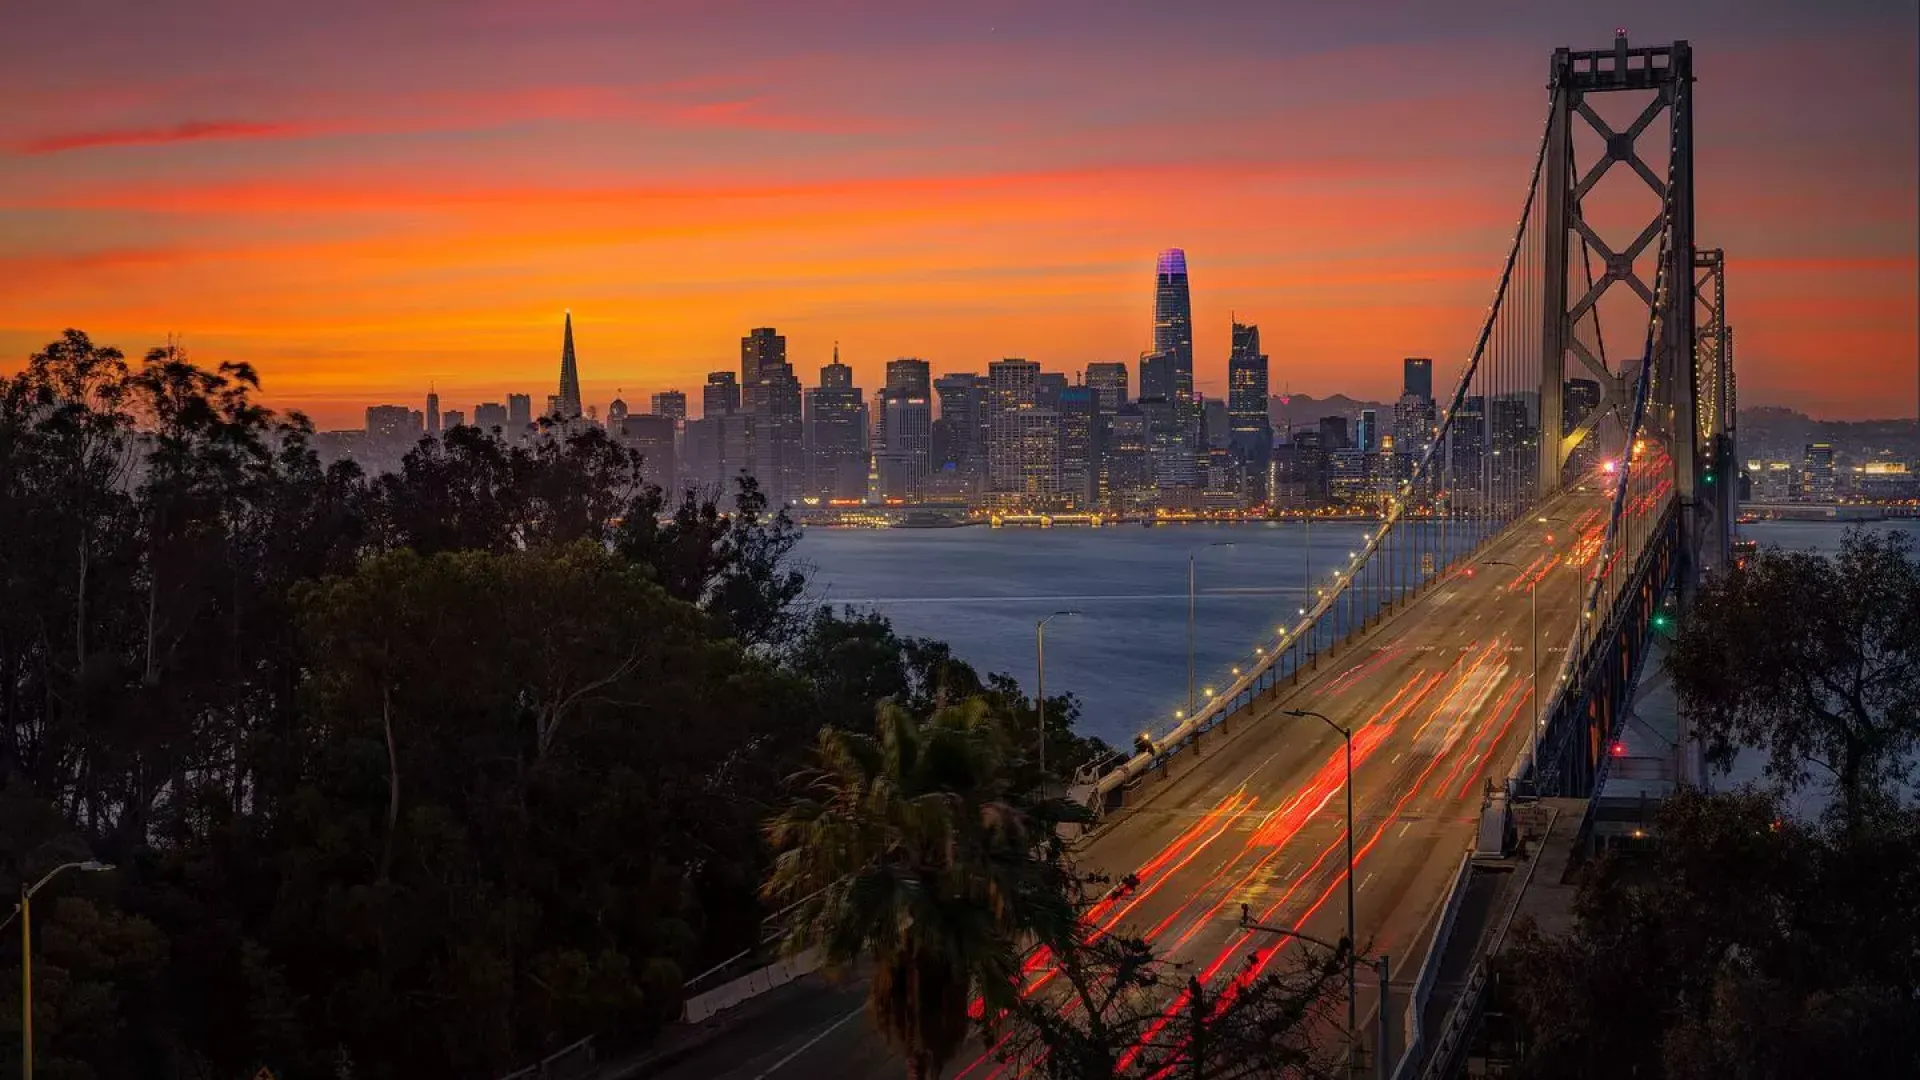 Sunset looking out over the Bay Brigde towards the SF skyline